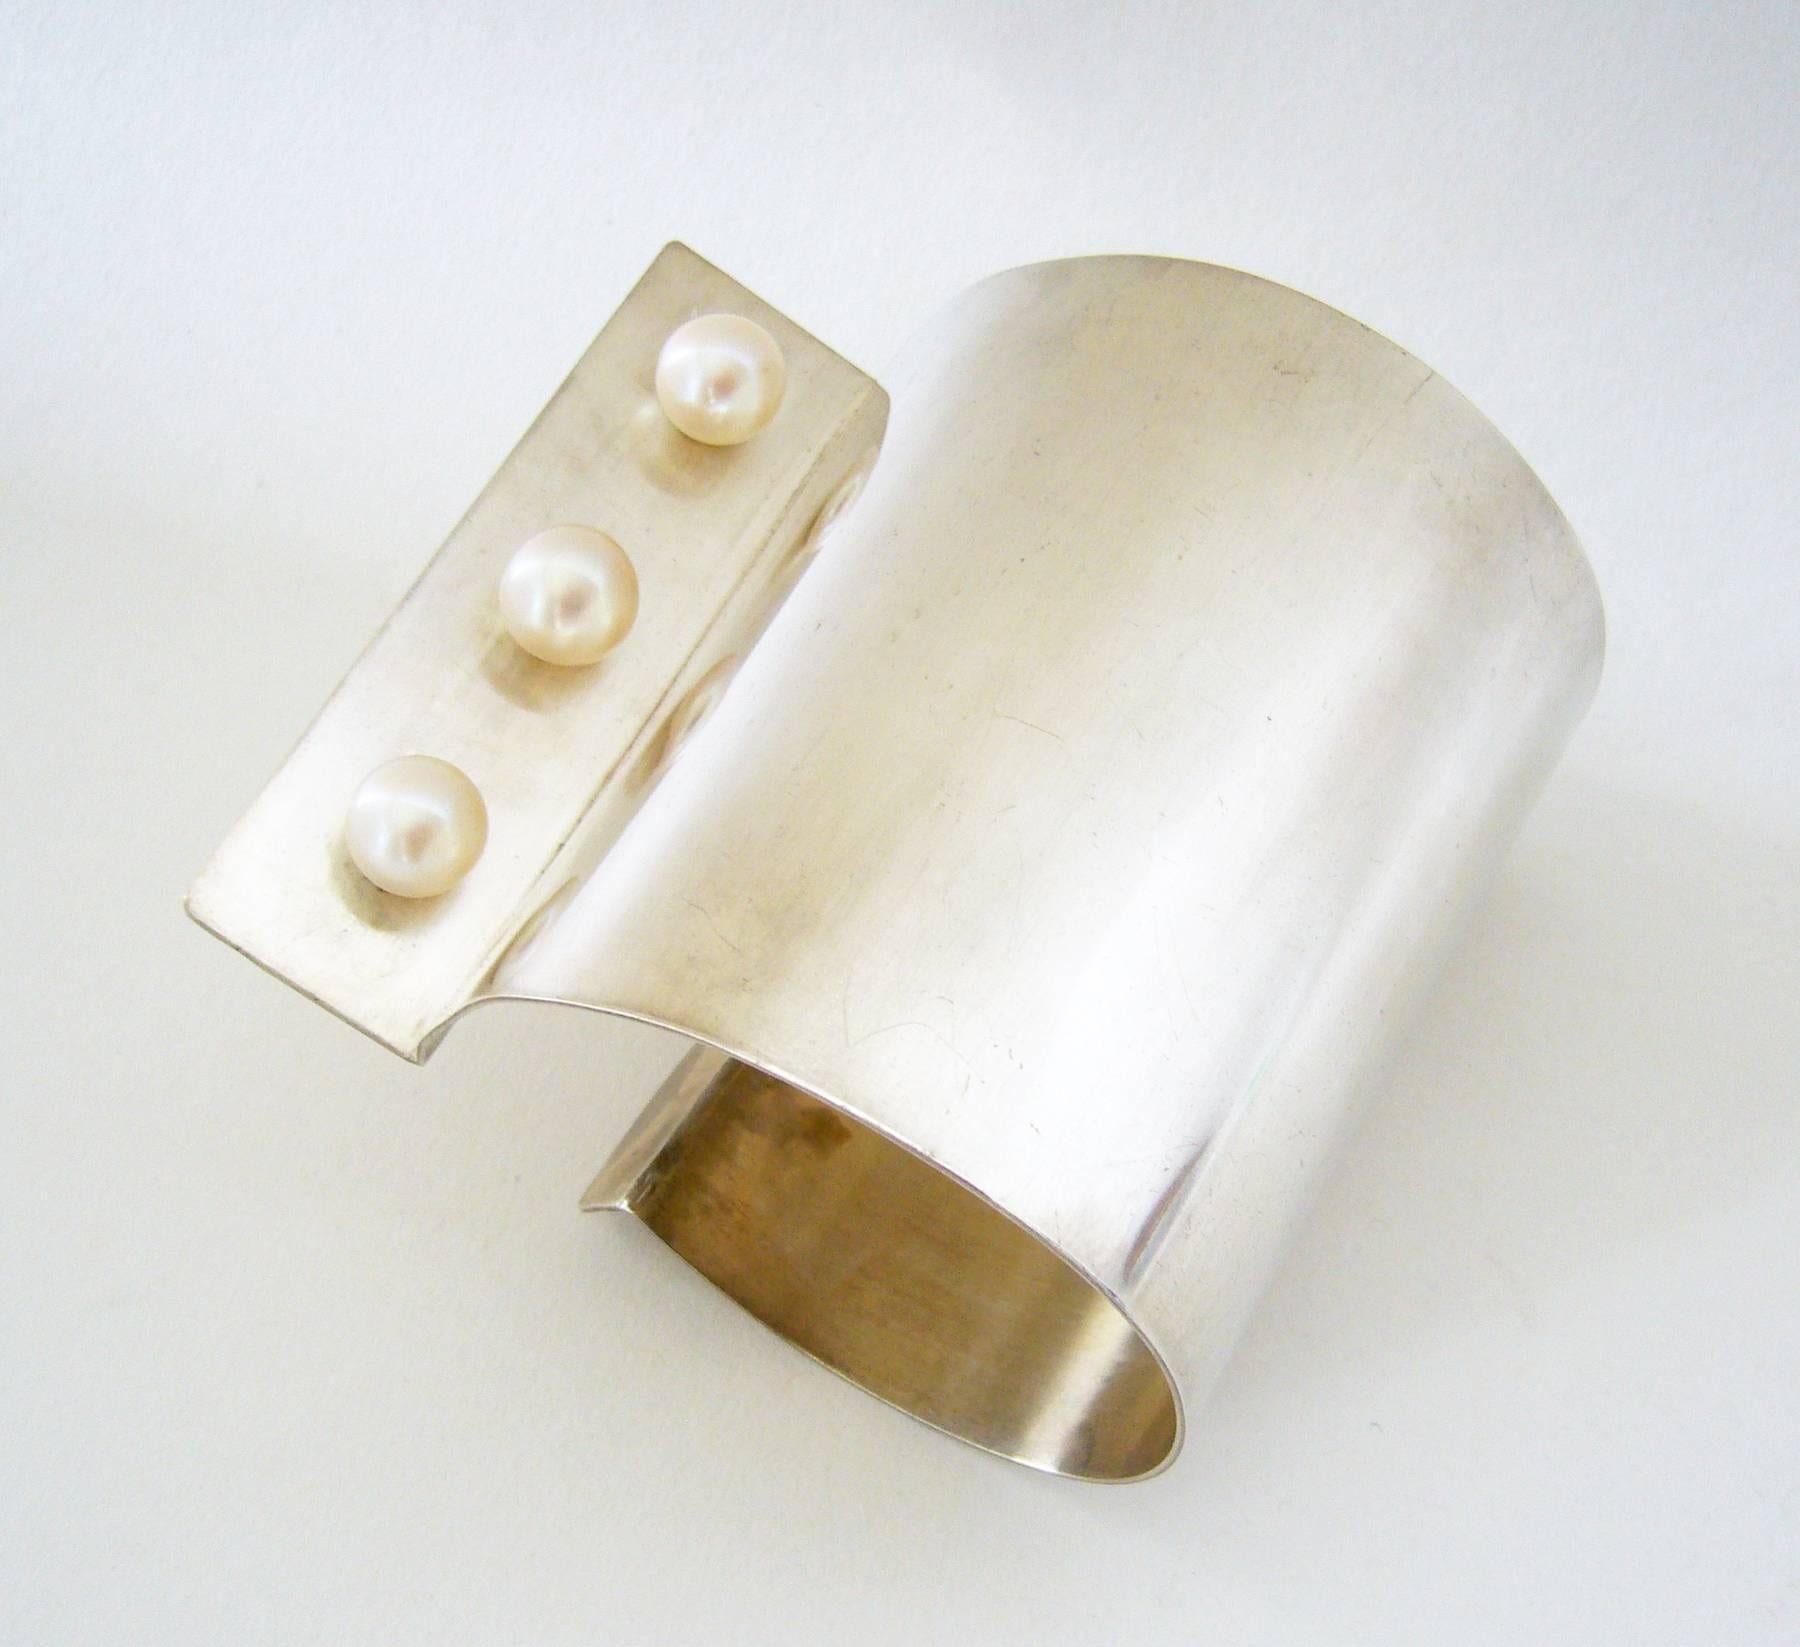 Sterling silver handmade cuff bracelet with three 12 mm south sea pearls, designed and created by Heidi Abrahamson of Phoenix, Arizona.  Bracelet is made for the left wrist and measures 3" in width with an interior circumference of 7.5". 